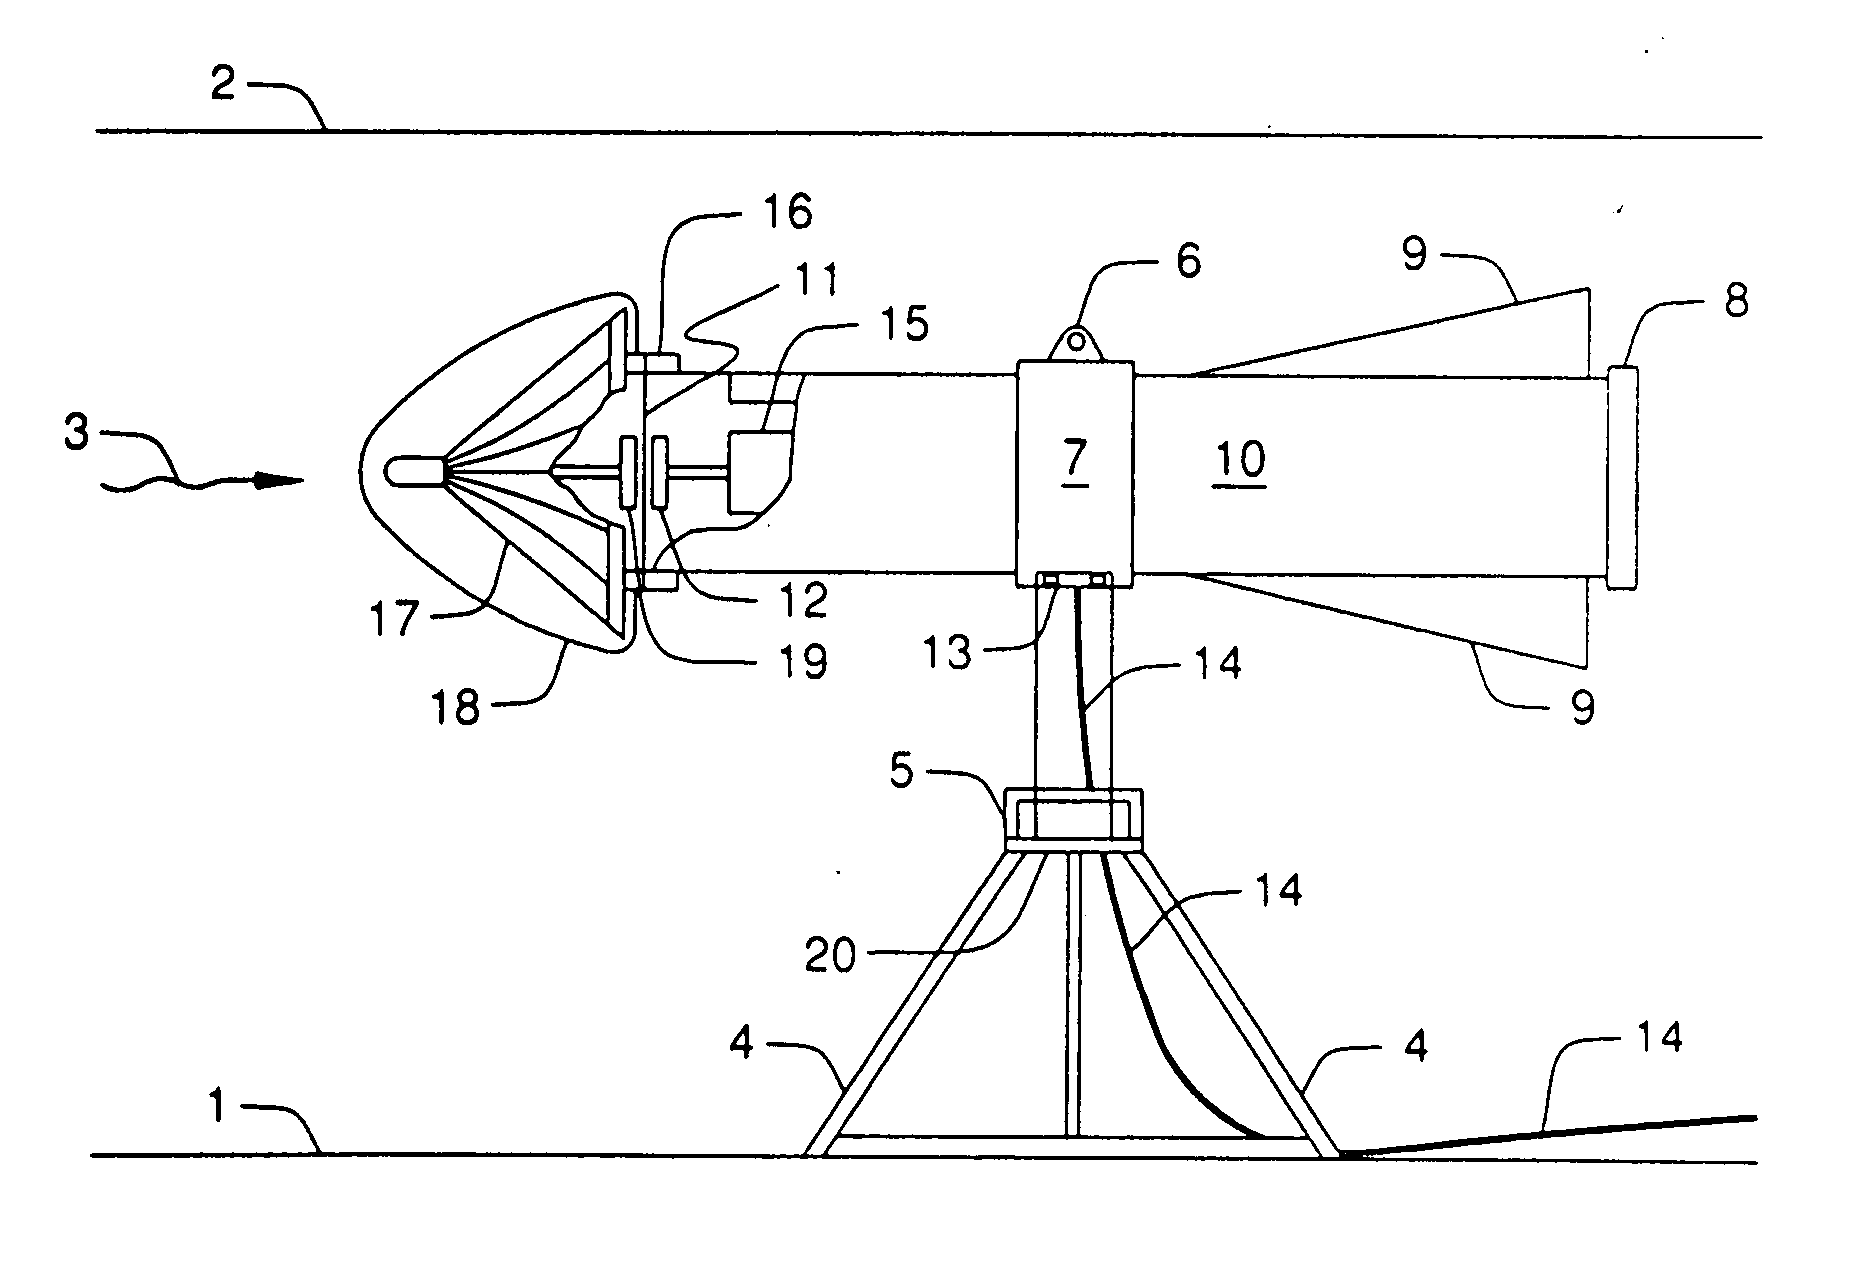 Tidal/water current electrical generating system